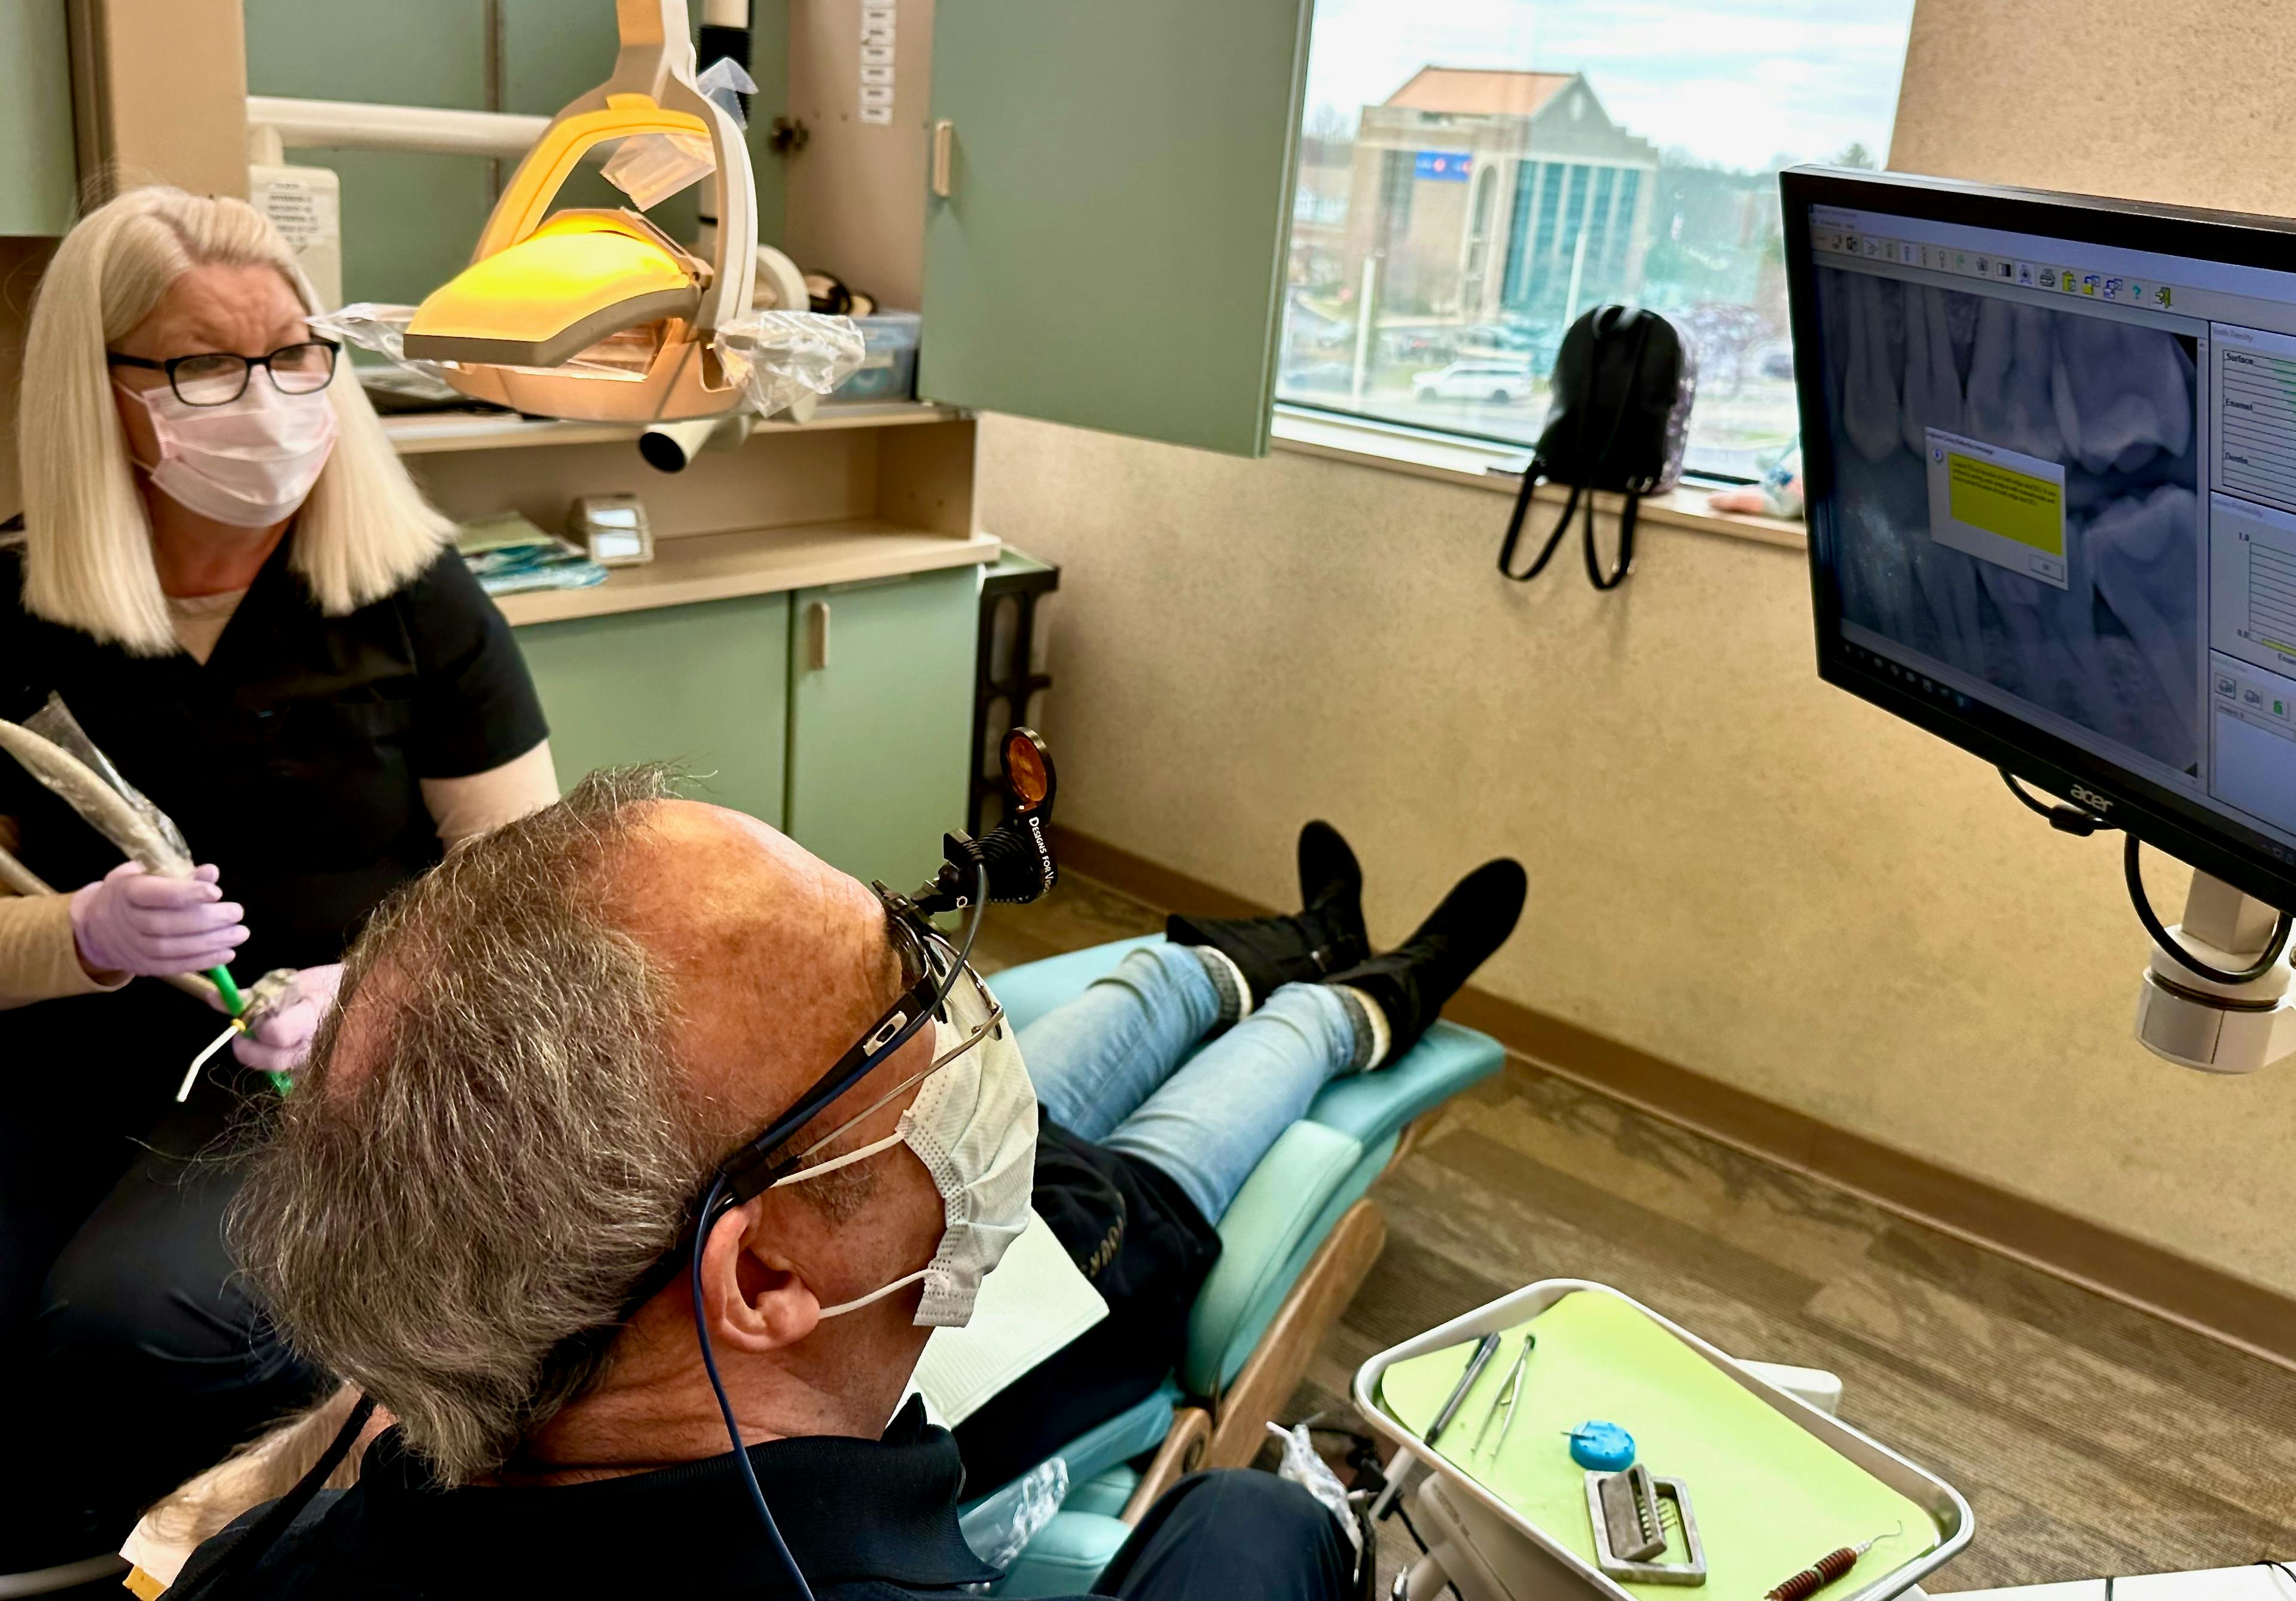 Dr. Keith A. Brown DDS, FAGD, with a patient and a computer displaying dental images in the background.